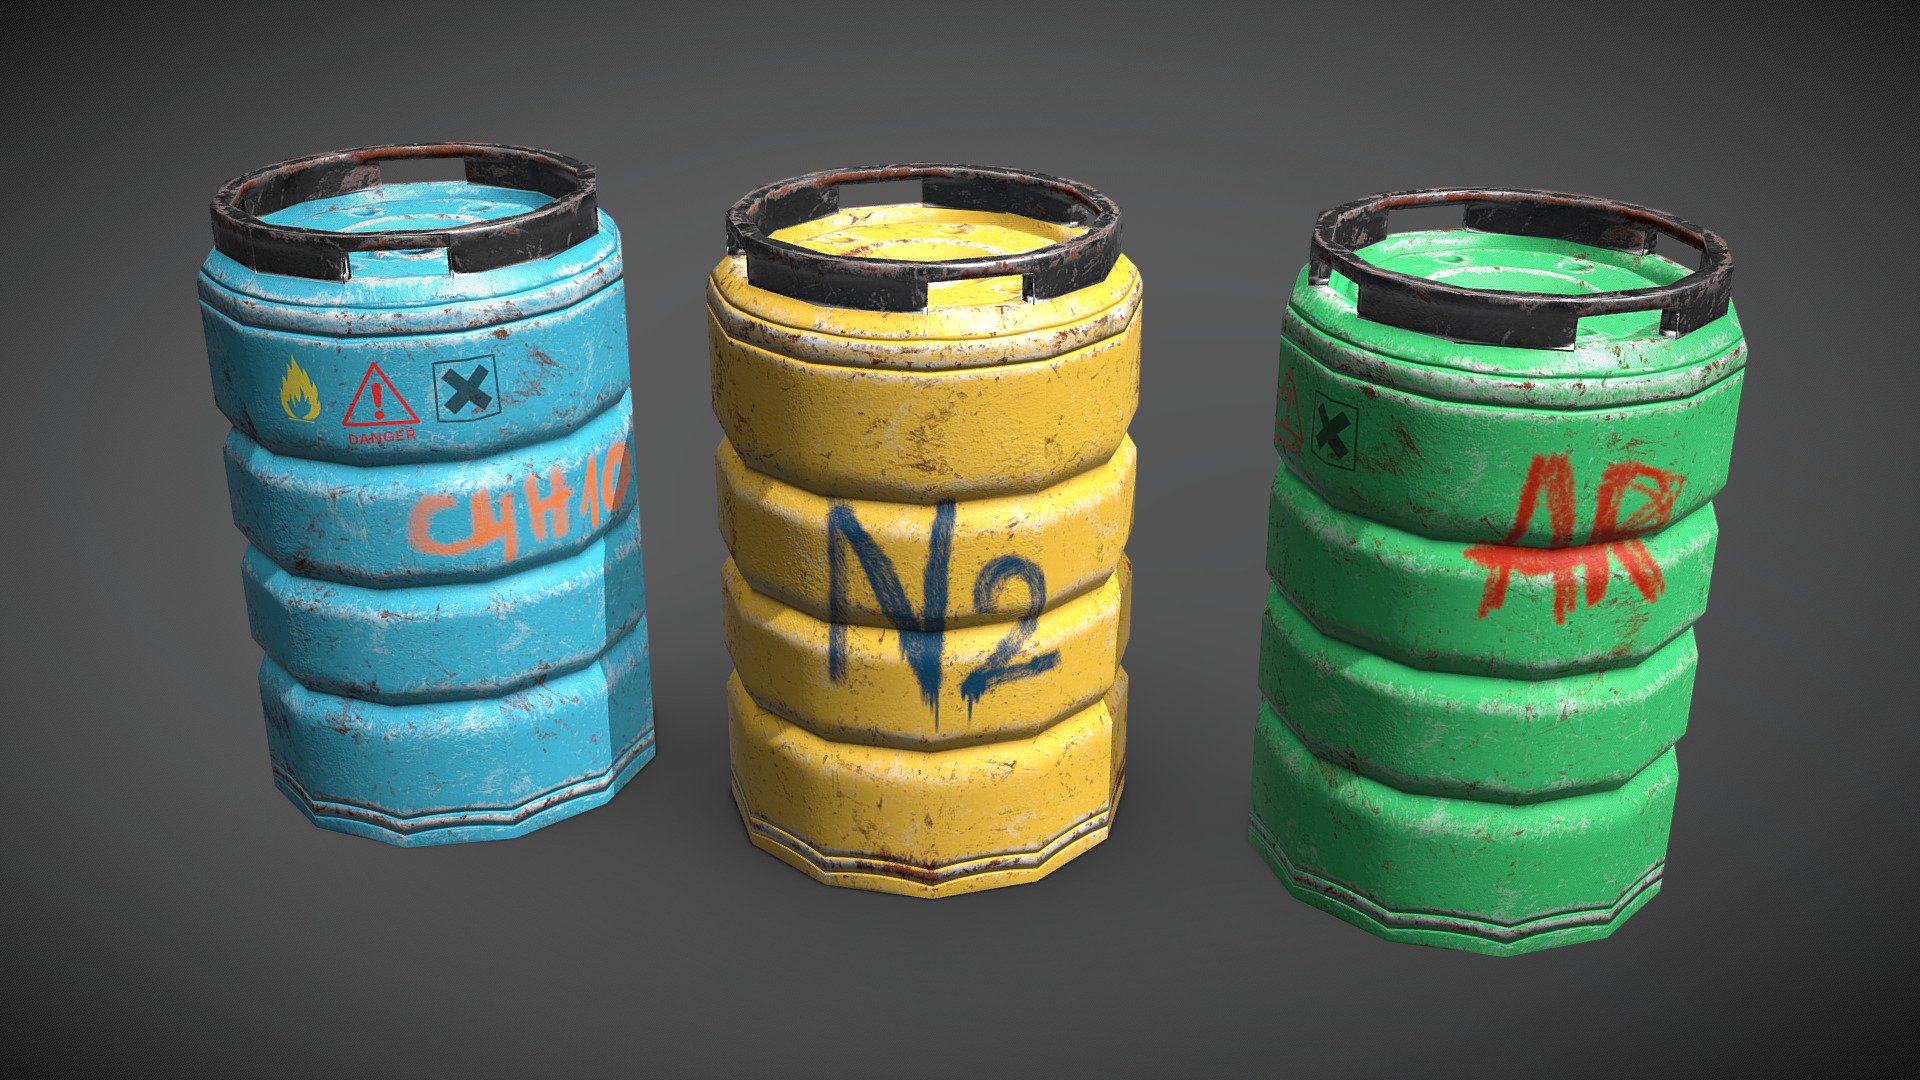 Gaz containers